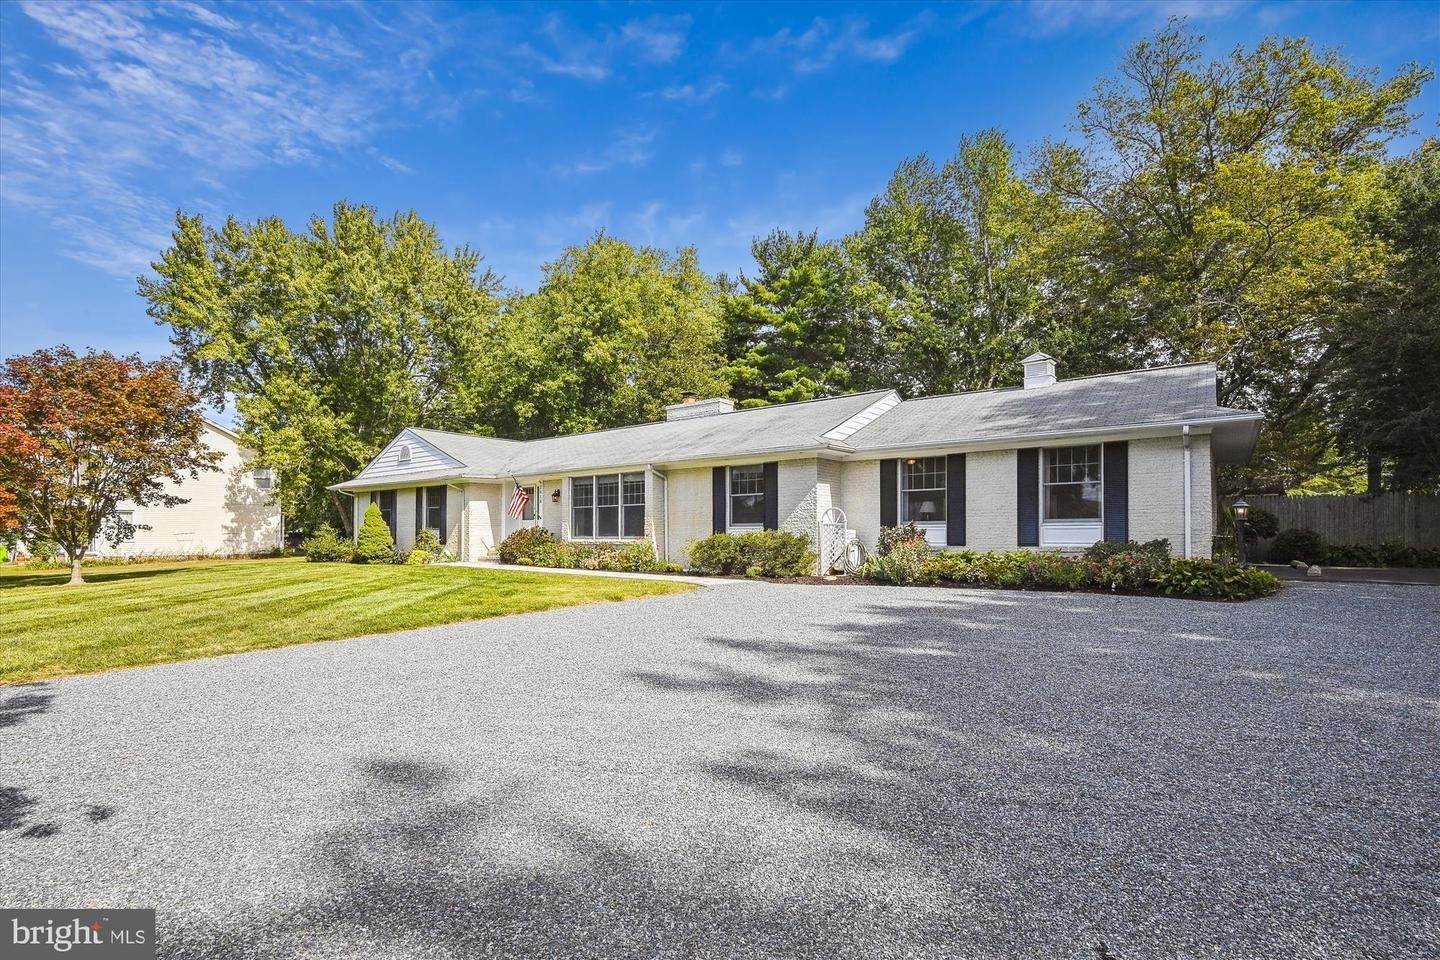 3. Single Family for Sale at Chester, MD 21619